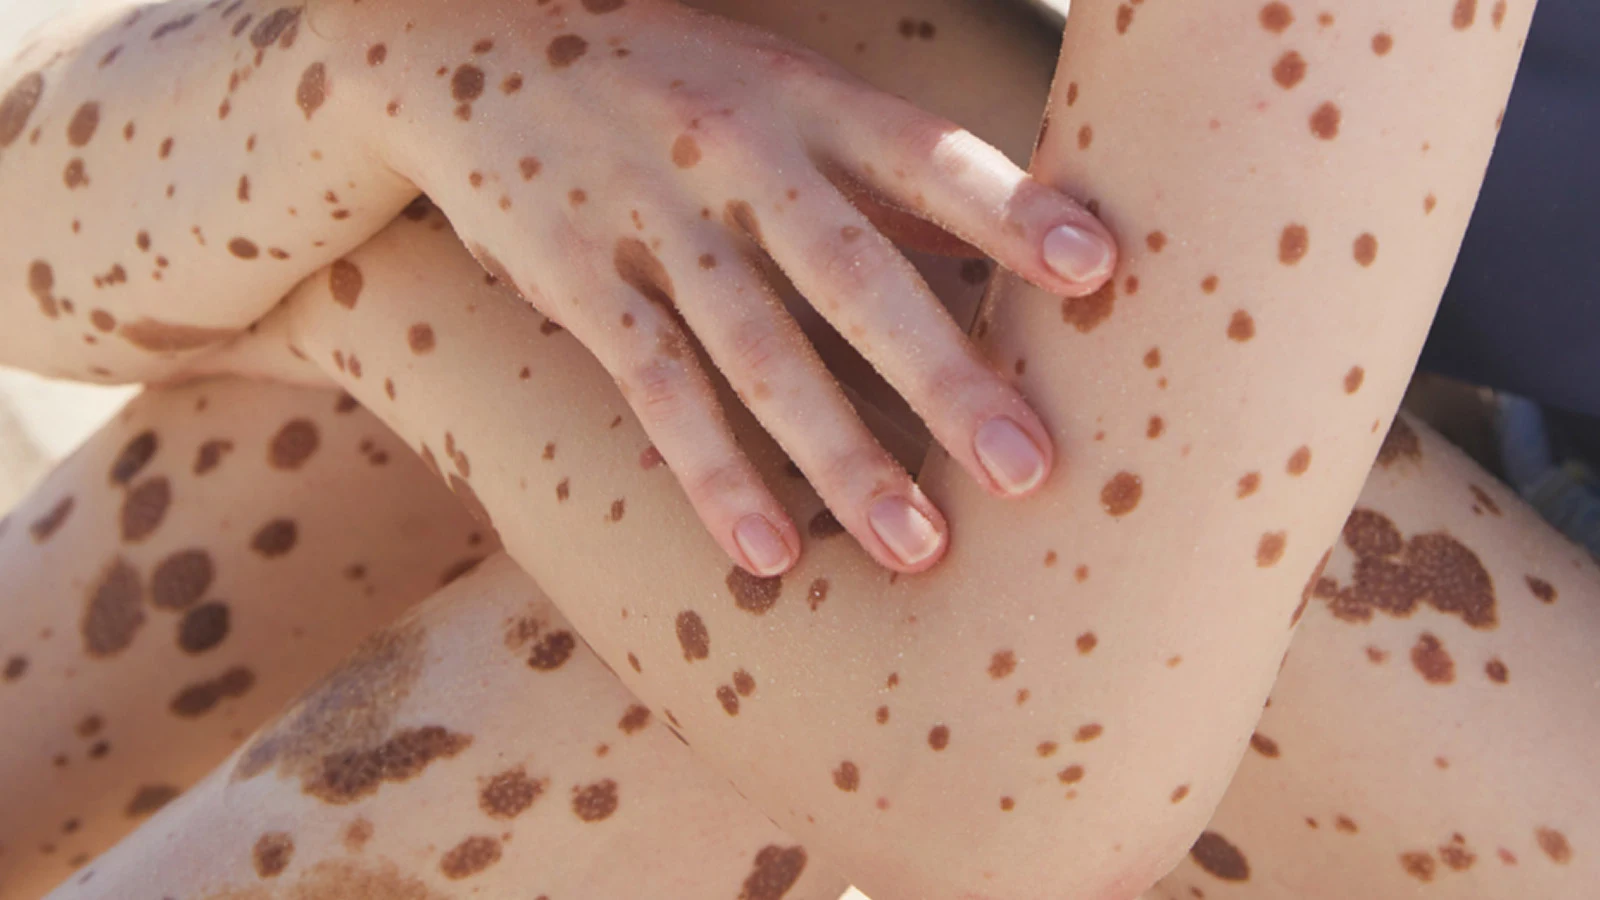 Woman with freckled skin